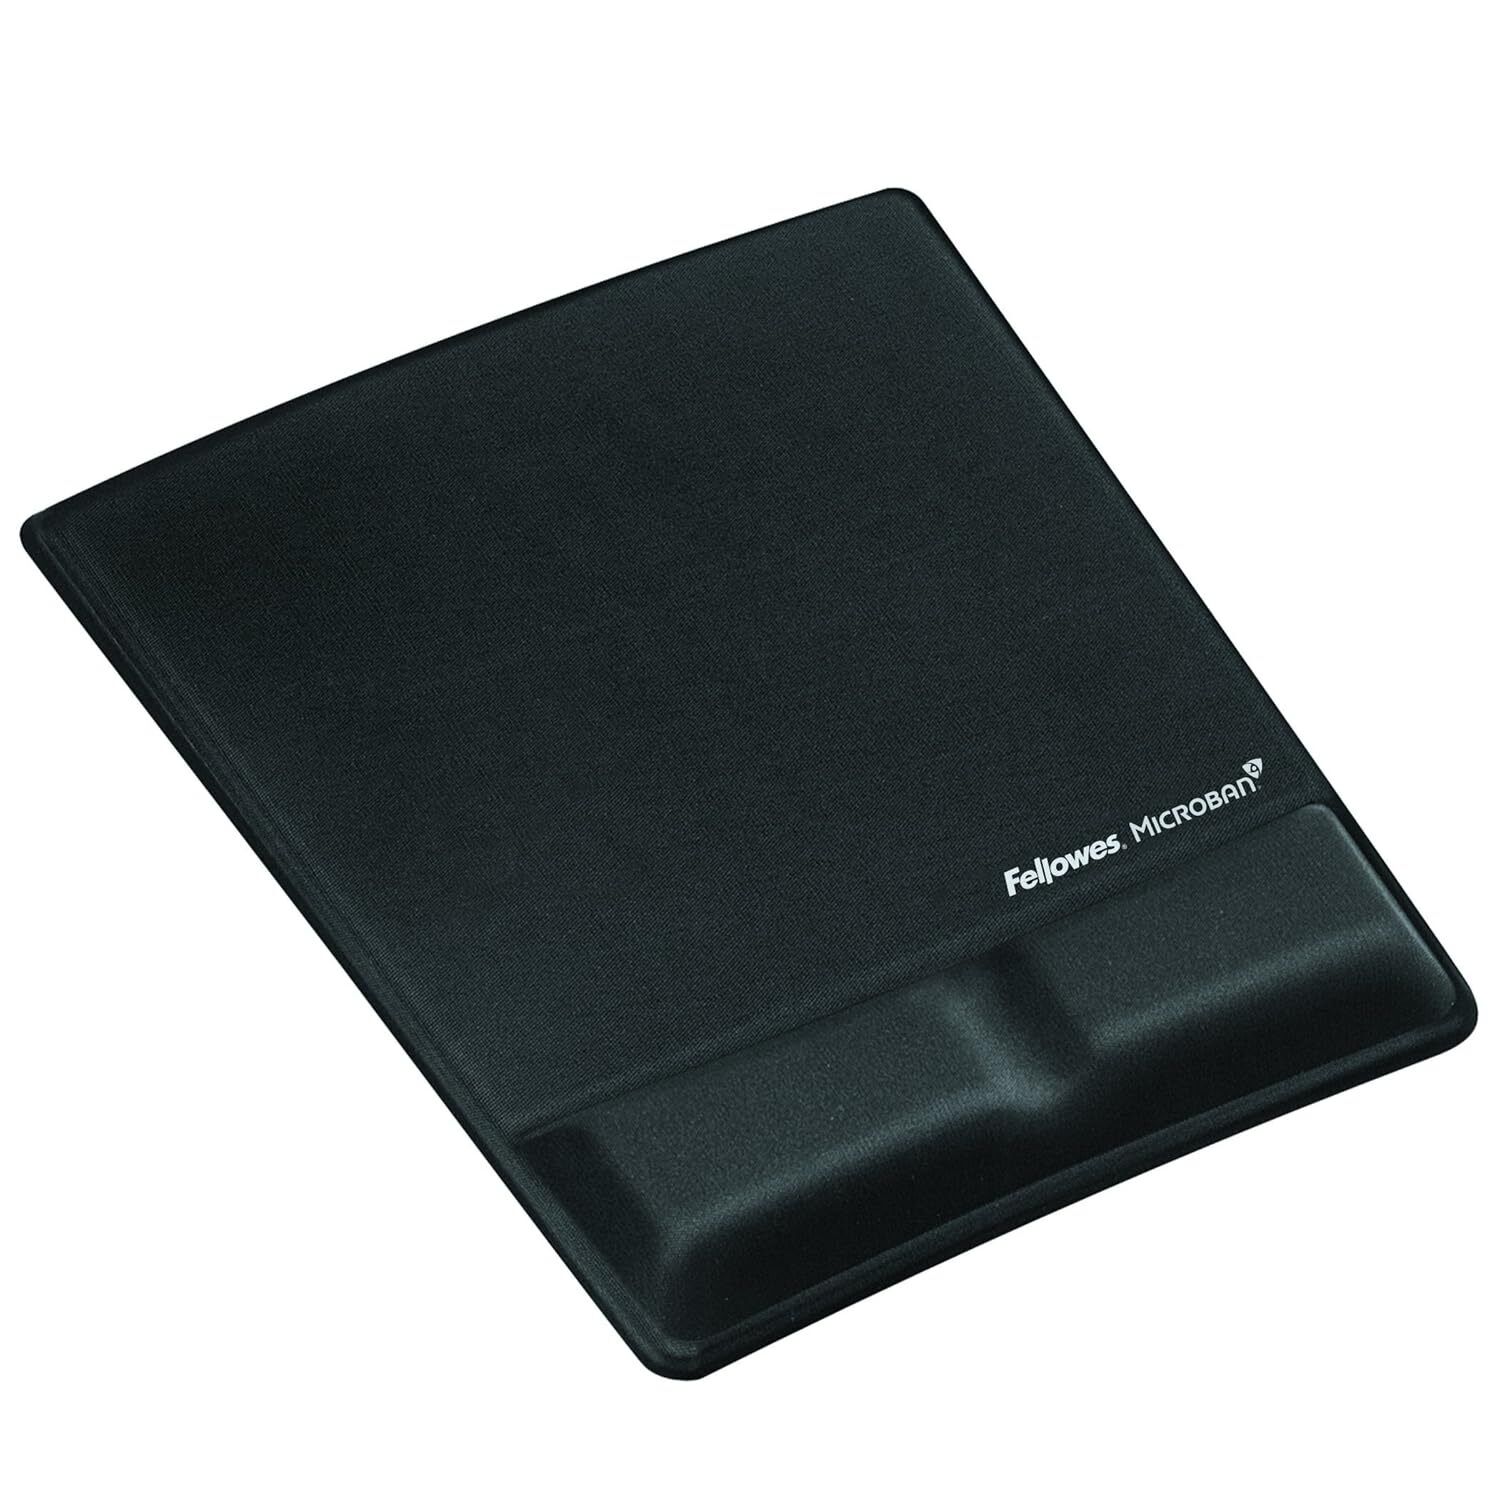 Fellowes Mouse Pad/Wrist Support with Mircoban Protection, Black (9181201)